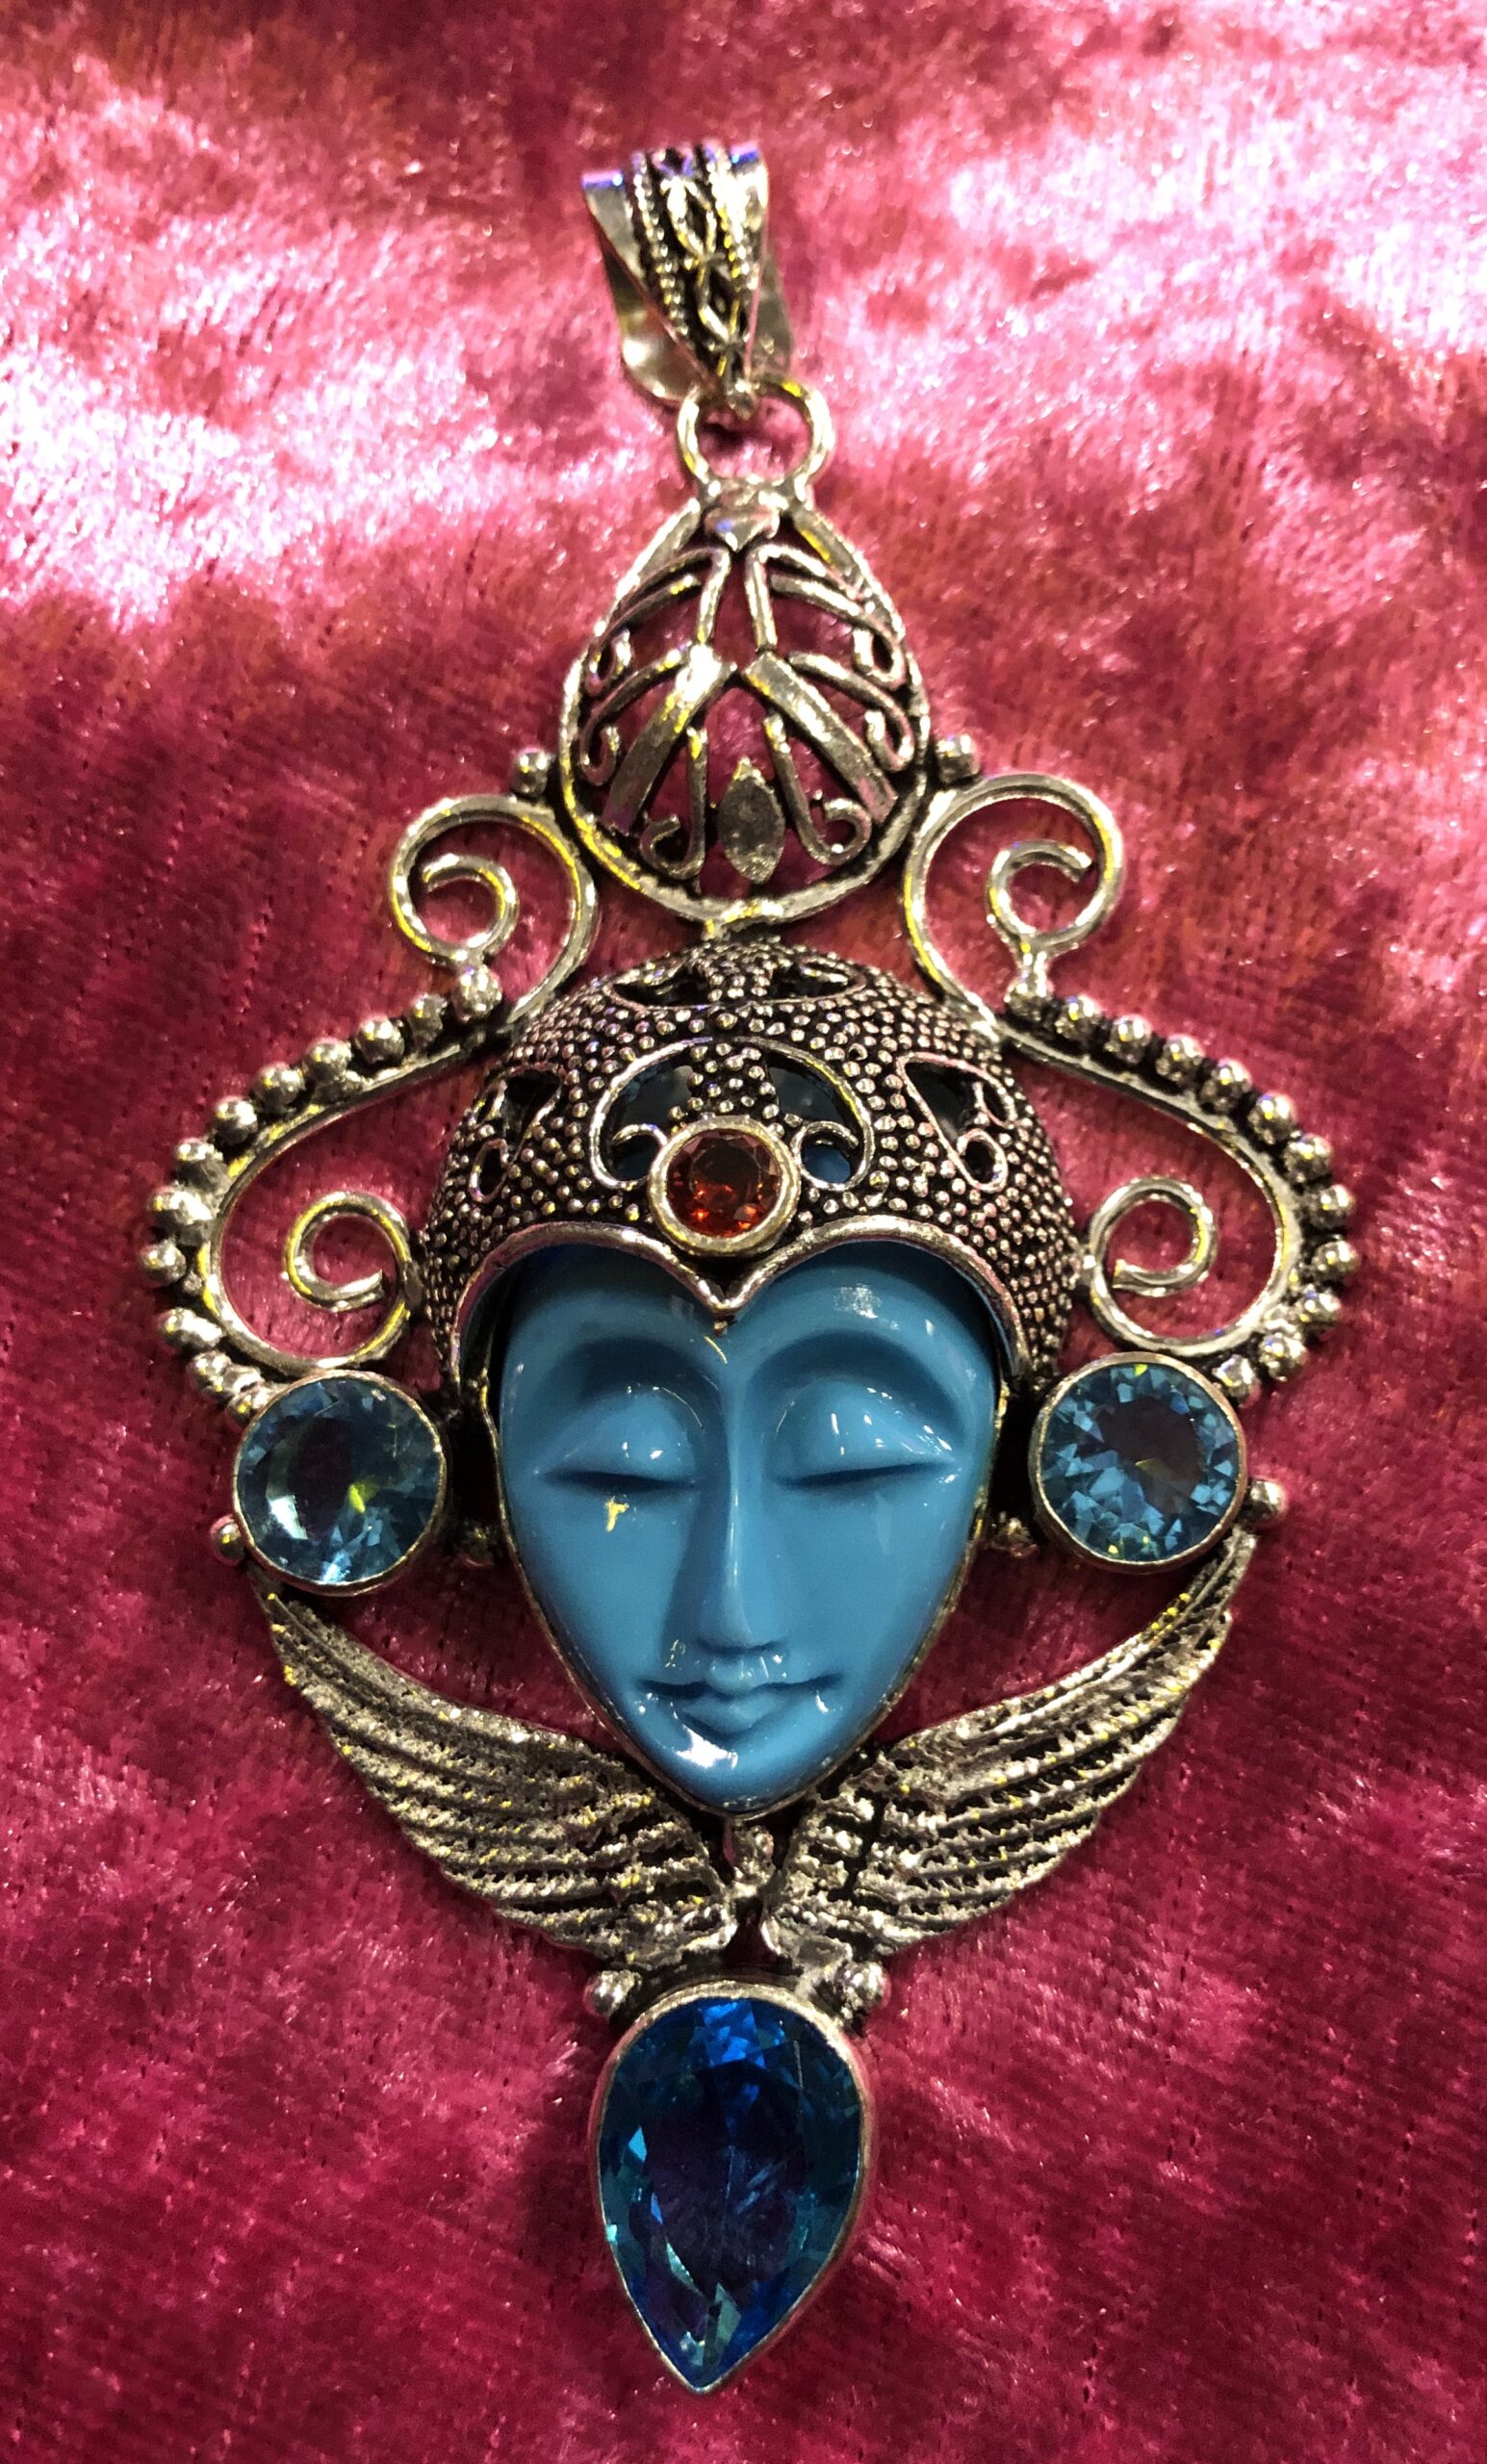 Goddess jewelry collection pendant - The Crystal Kingdom Academy